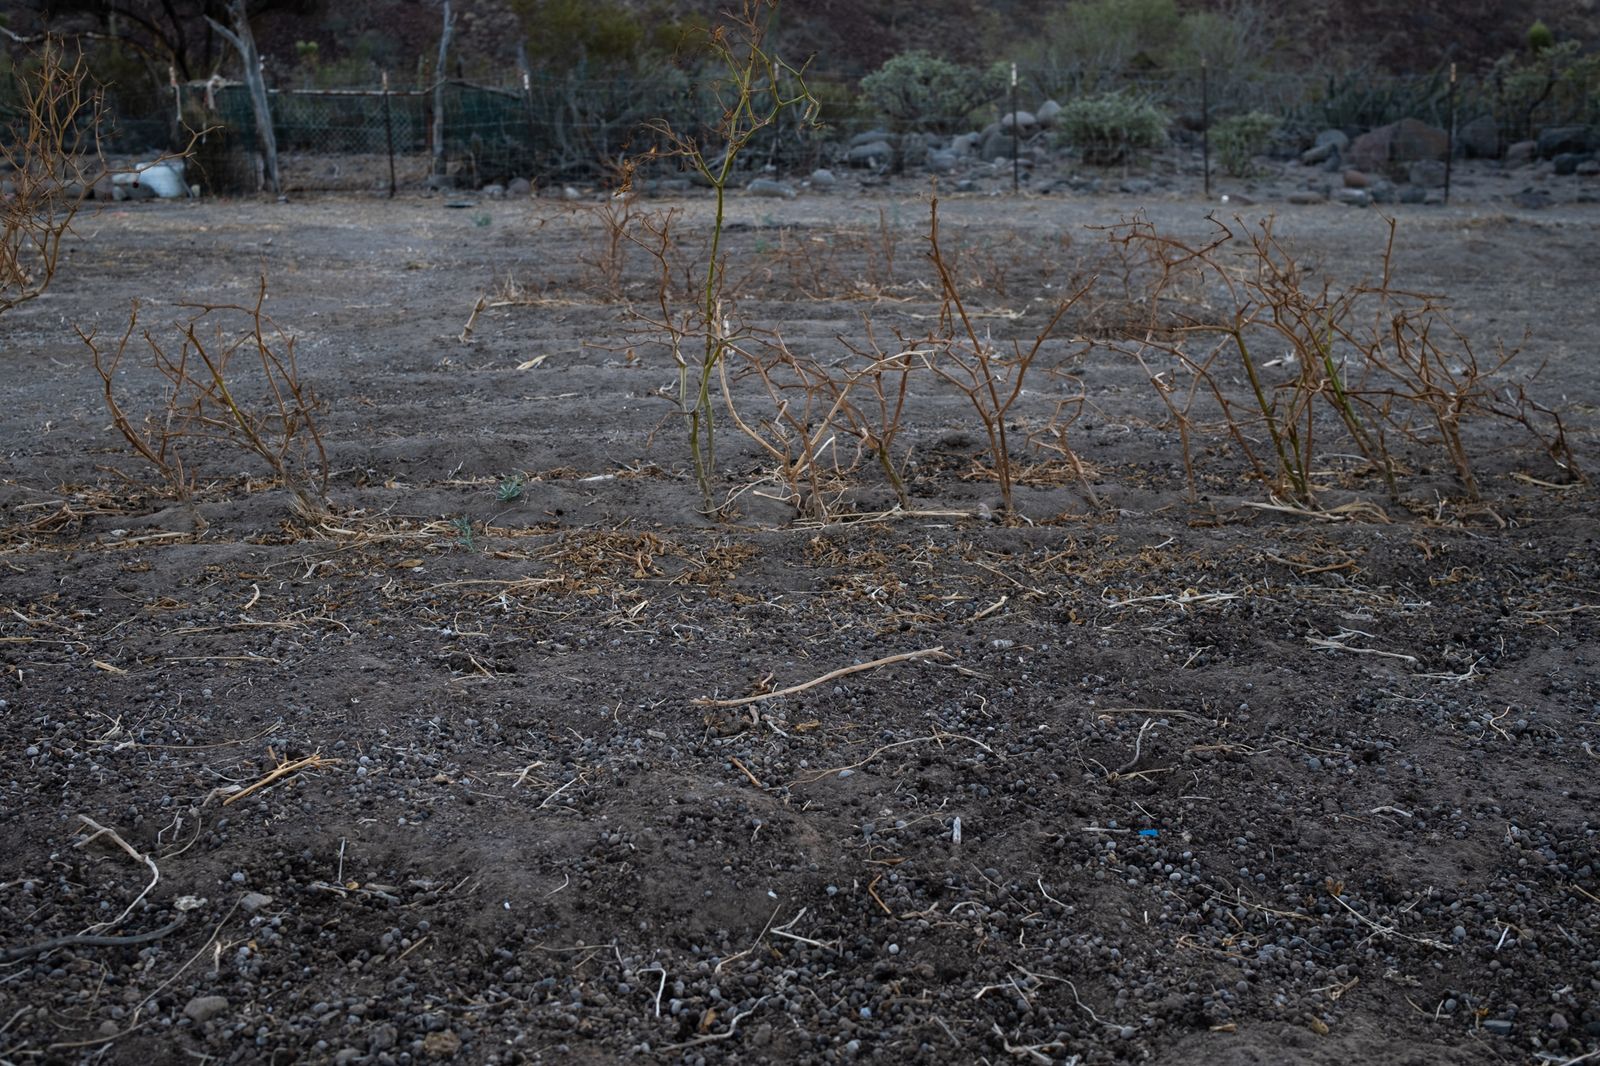 © Sofia Aldinio - A piece of land it’s fenced, to grow food, at a small farm in Baja California, Mexico. December 2020.